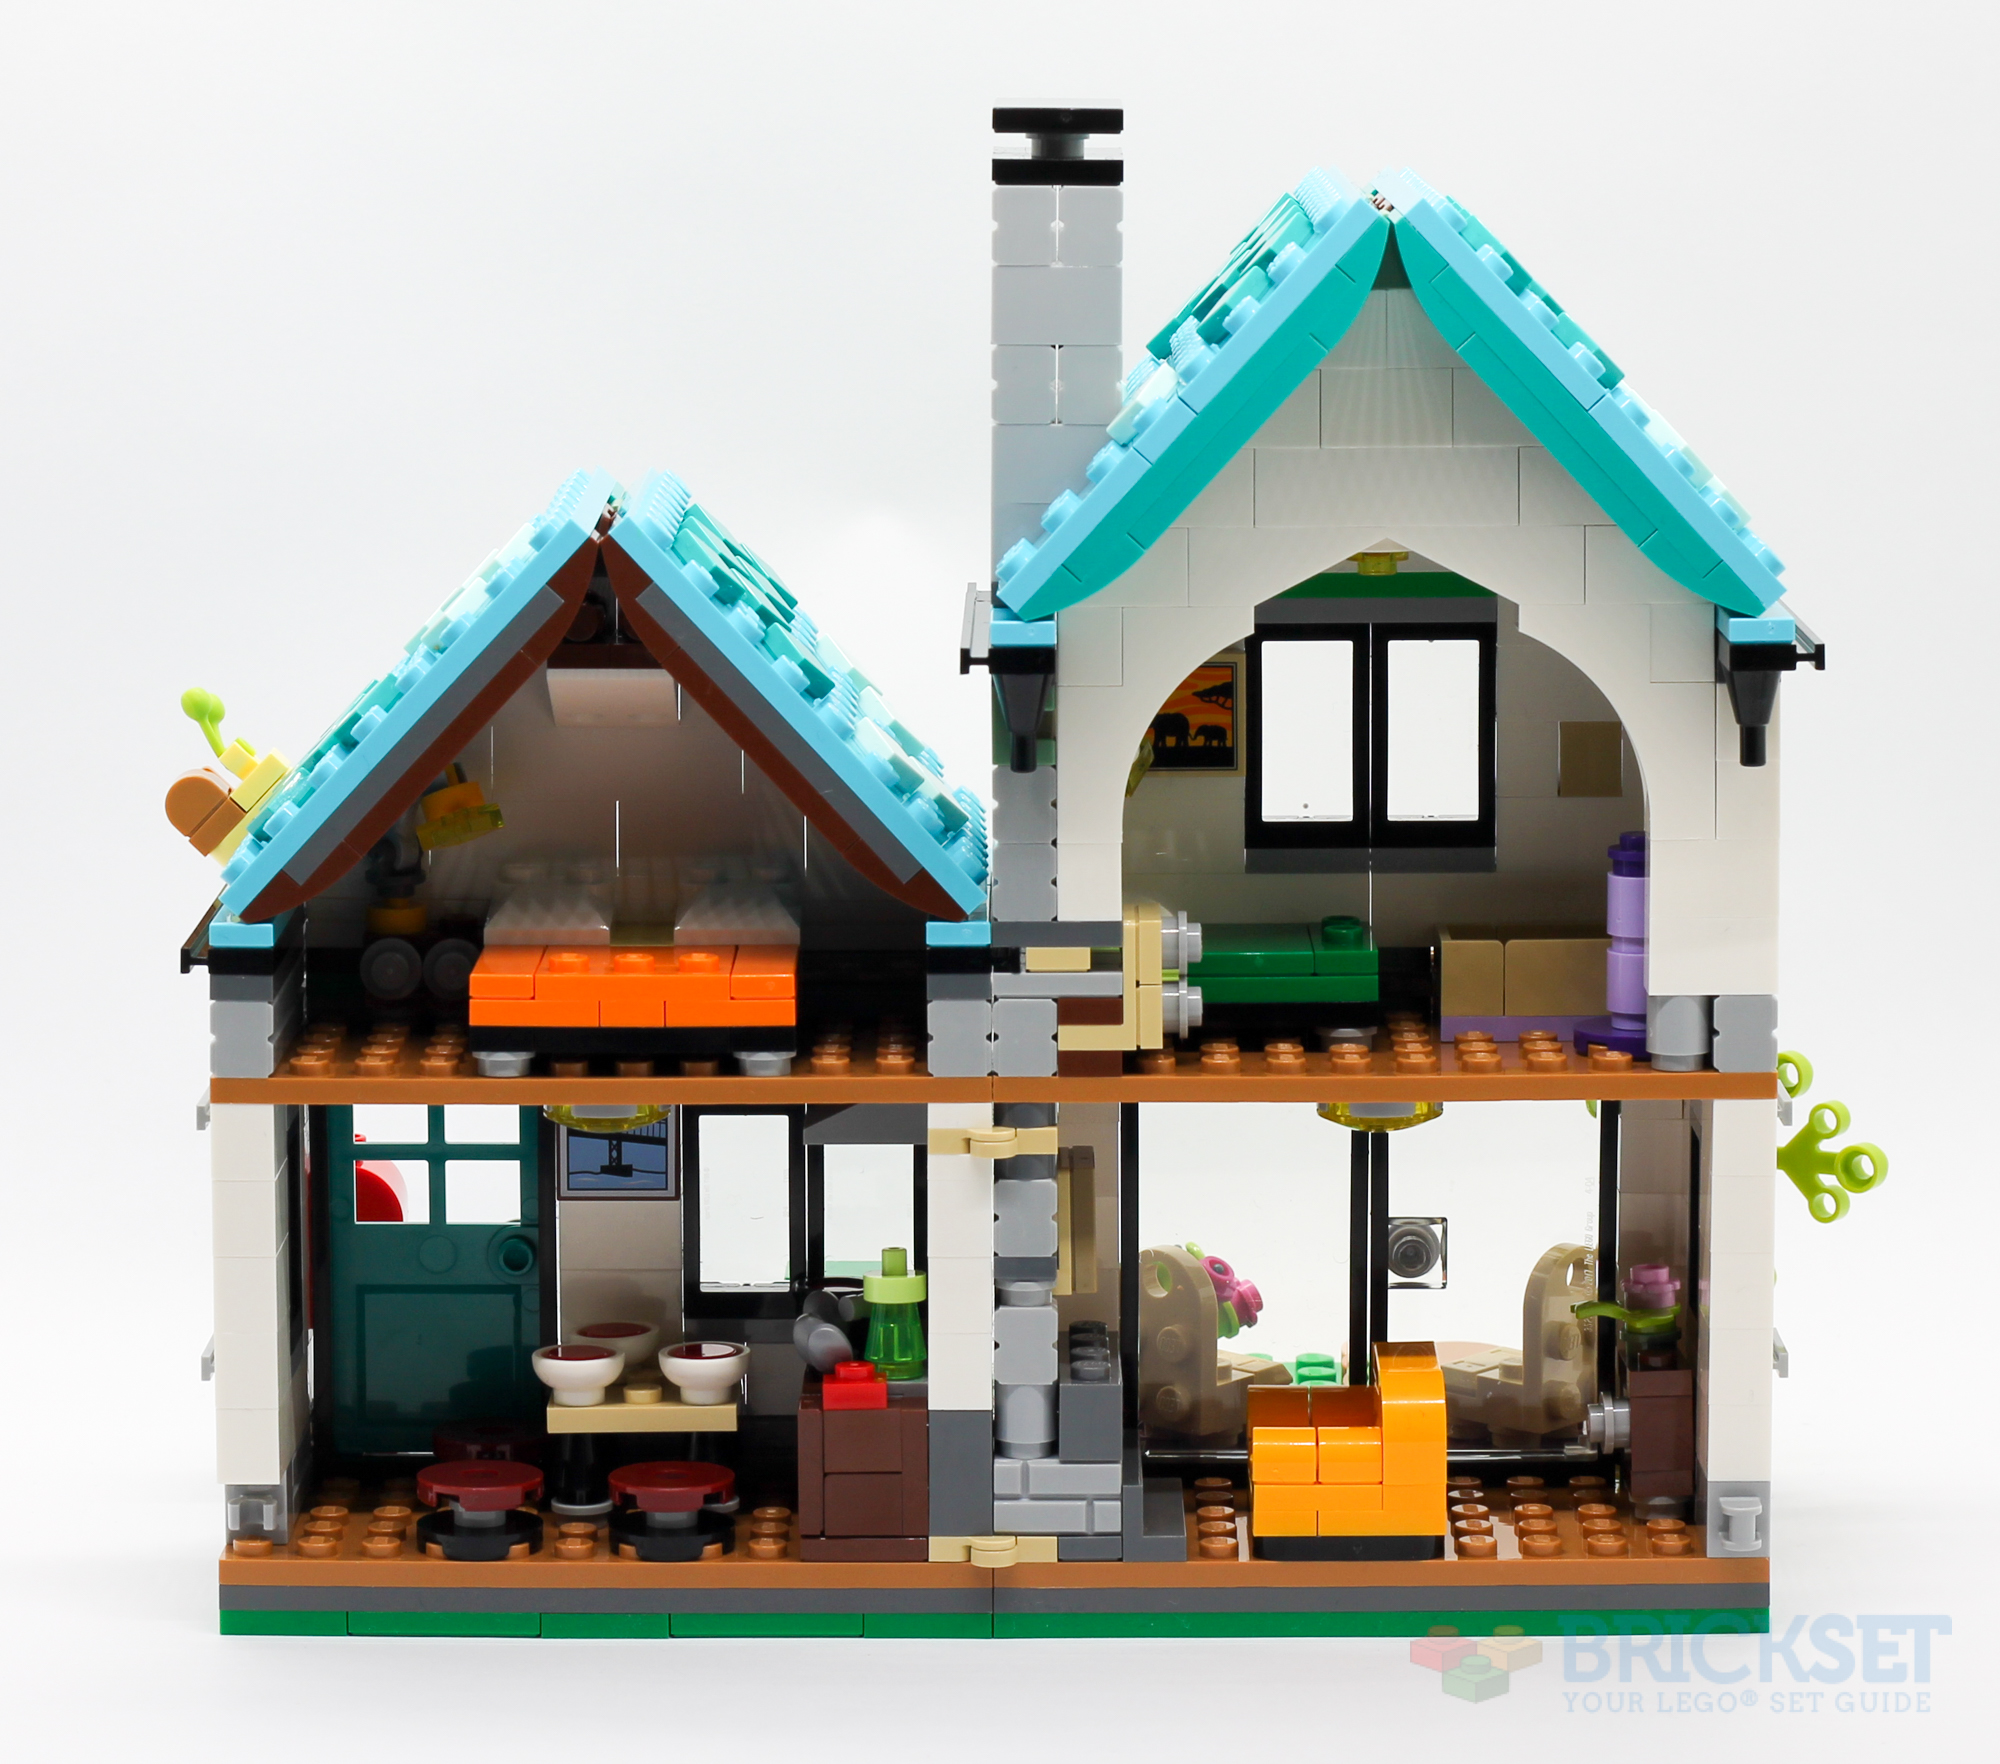 Lego Creator 3 In 1 Cozy House Toys Model Building Set 31139 : Target